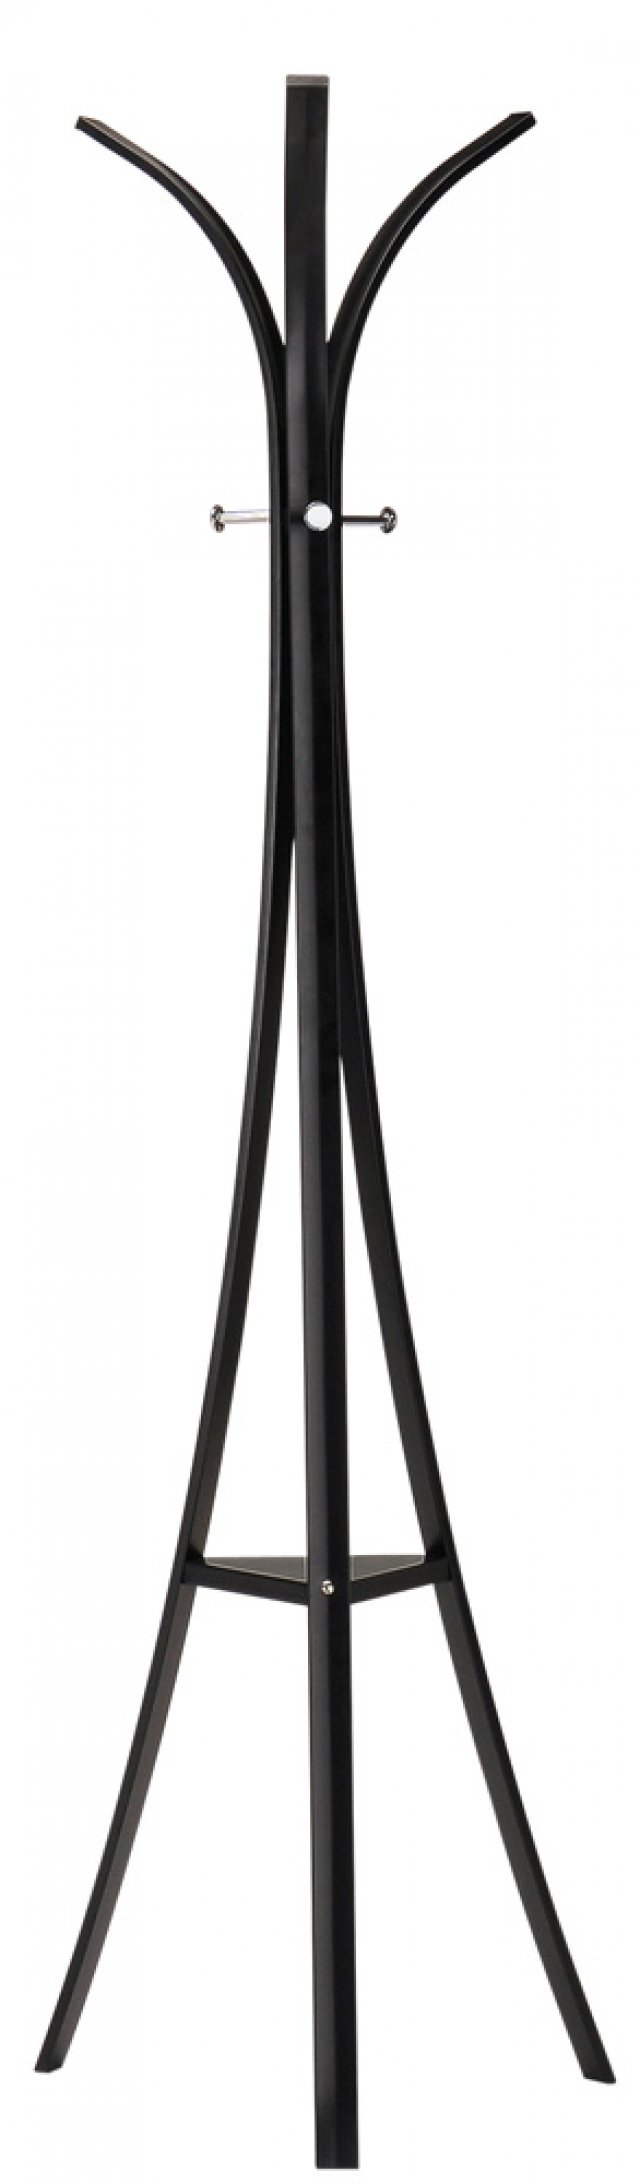 GENT Hat and coat stand